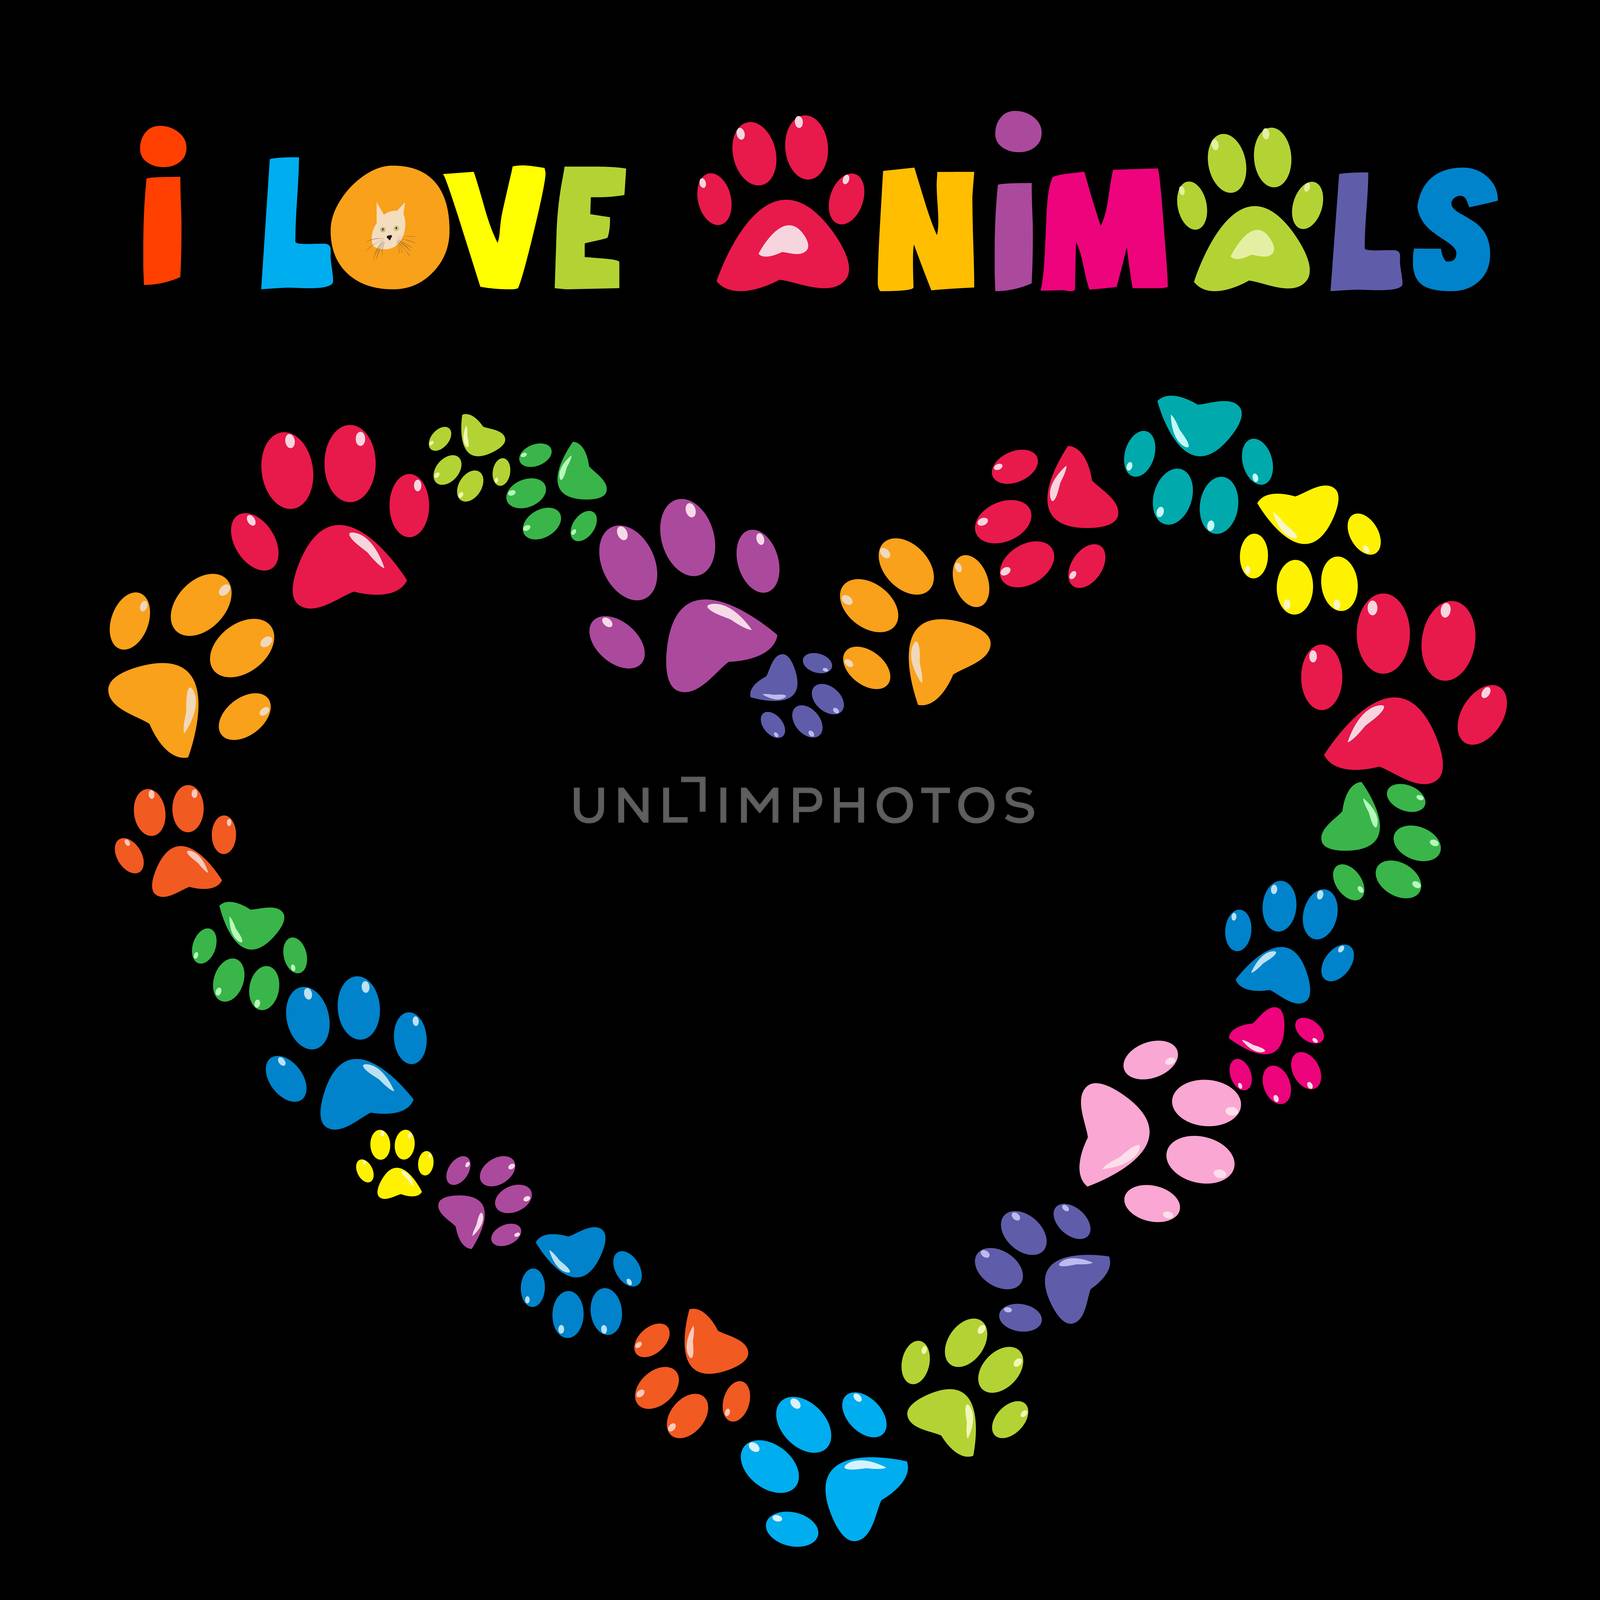 I love animals card with colorful paw prints heart frame by hibrida13